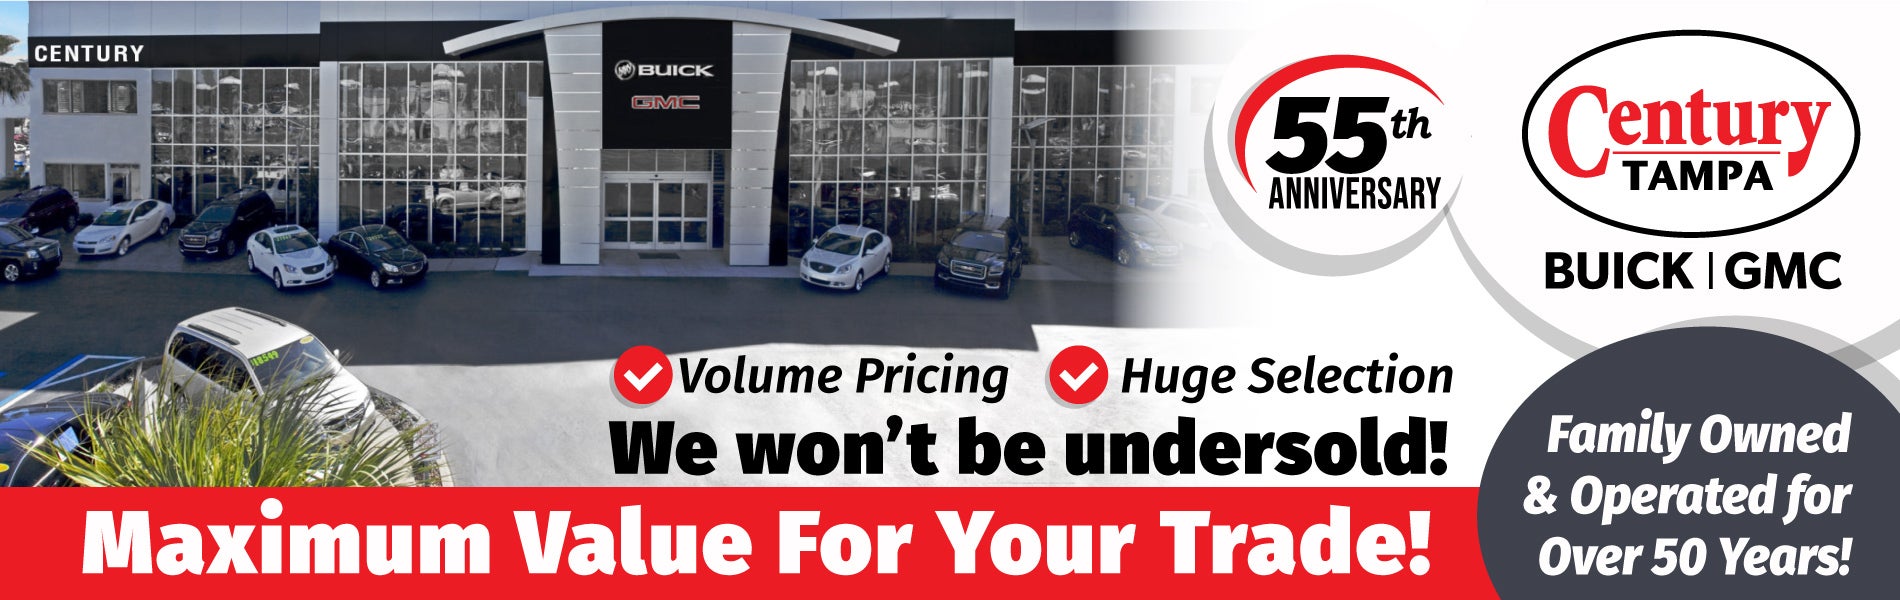 Century Buick GMC has low prices on Buick and GMC models!